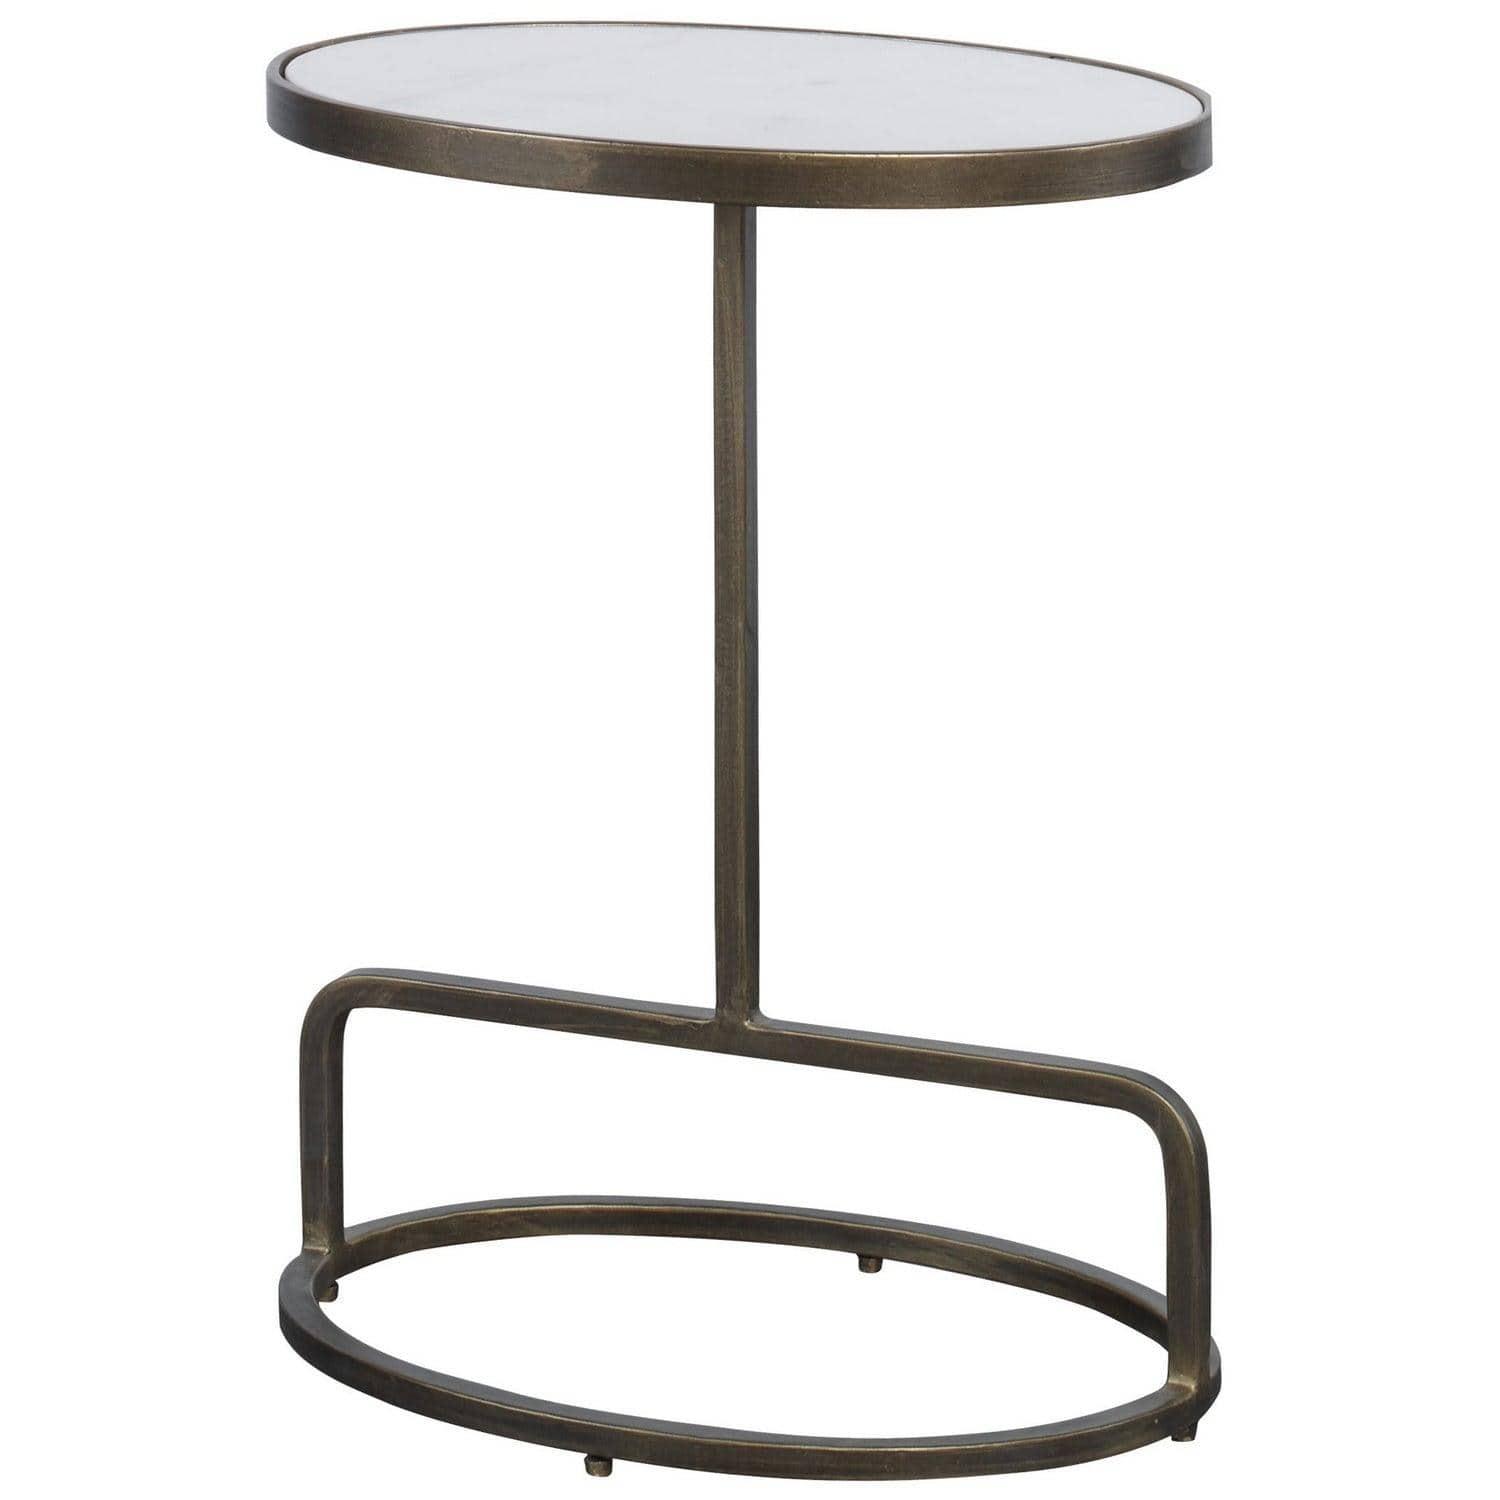 The Uttermost - Jessenia Accent Table - 25135 | Montreal Lighting & Hardware